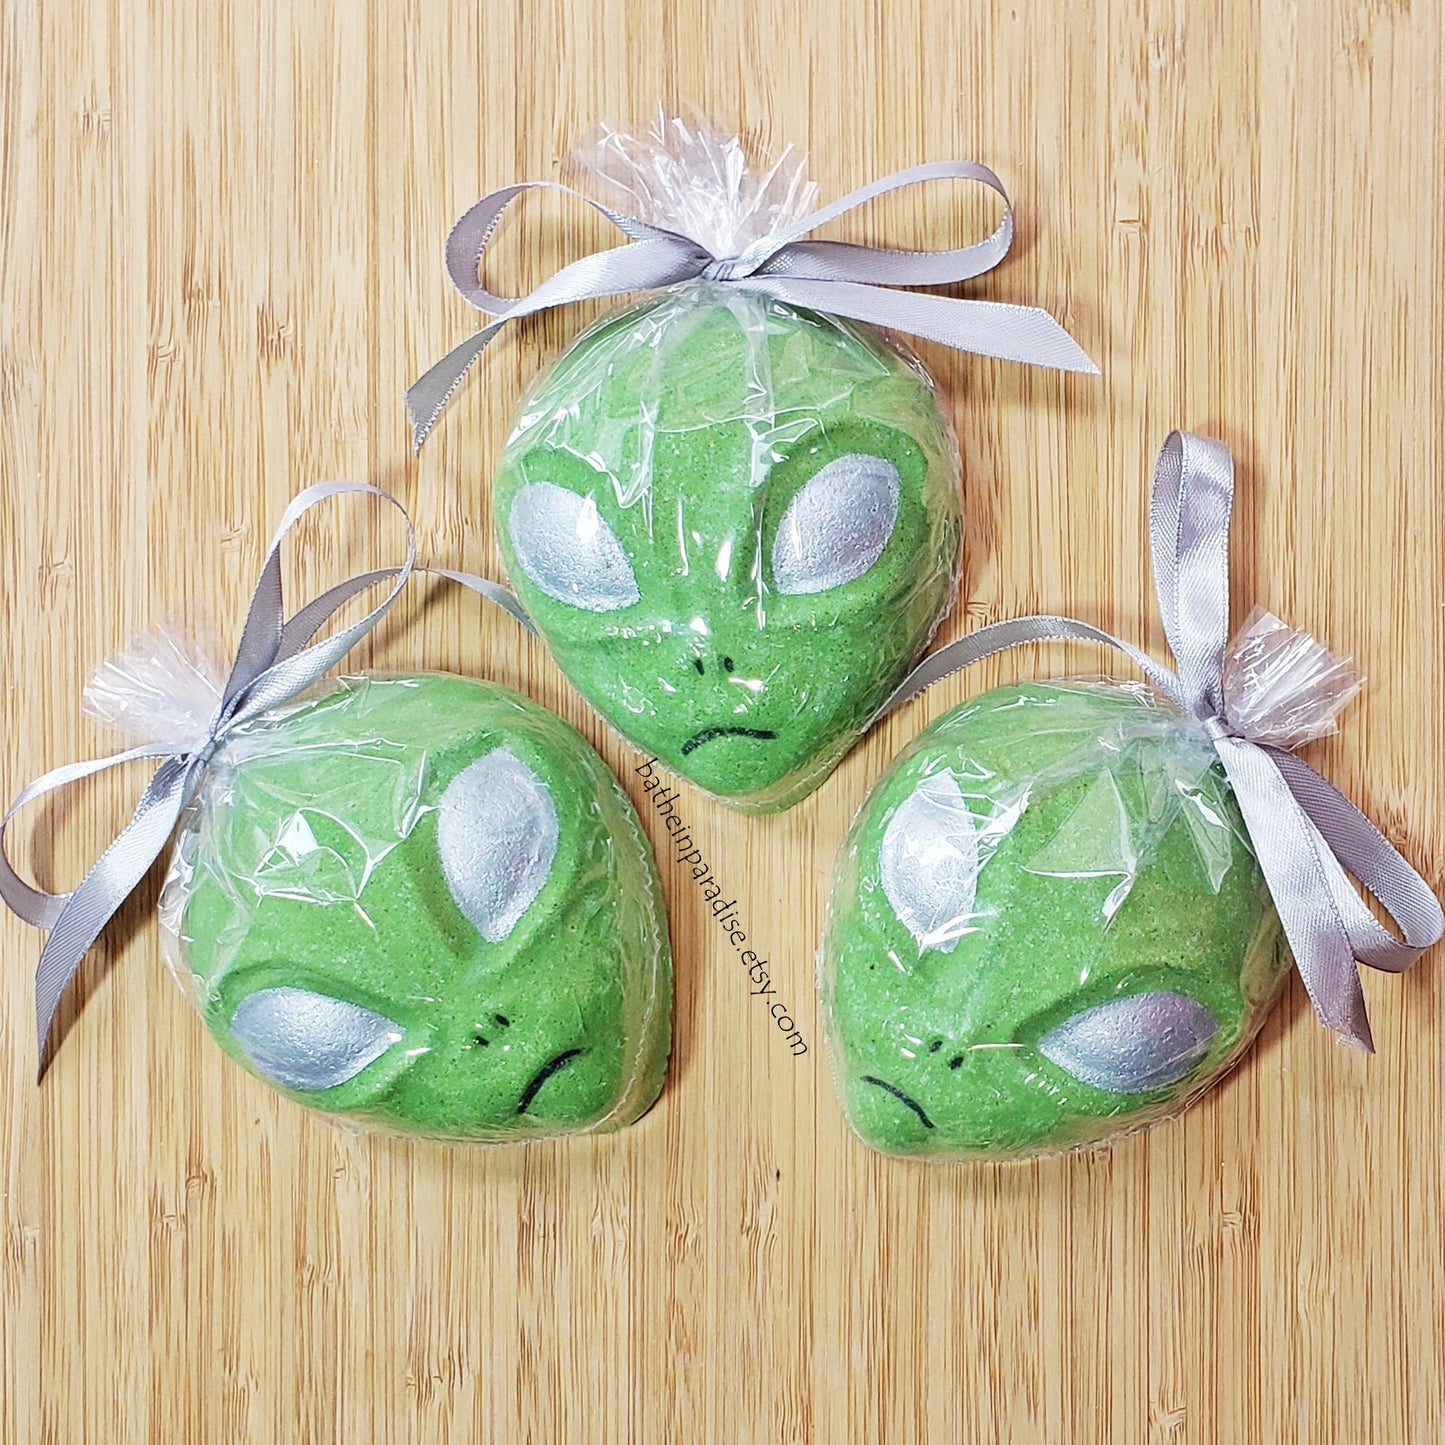 Alien Toy Bath Bomb (1) | Bath Bombs For Kids With Toys Inside